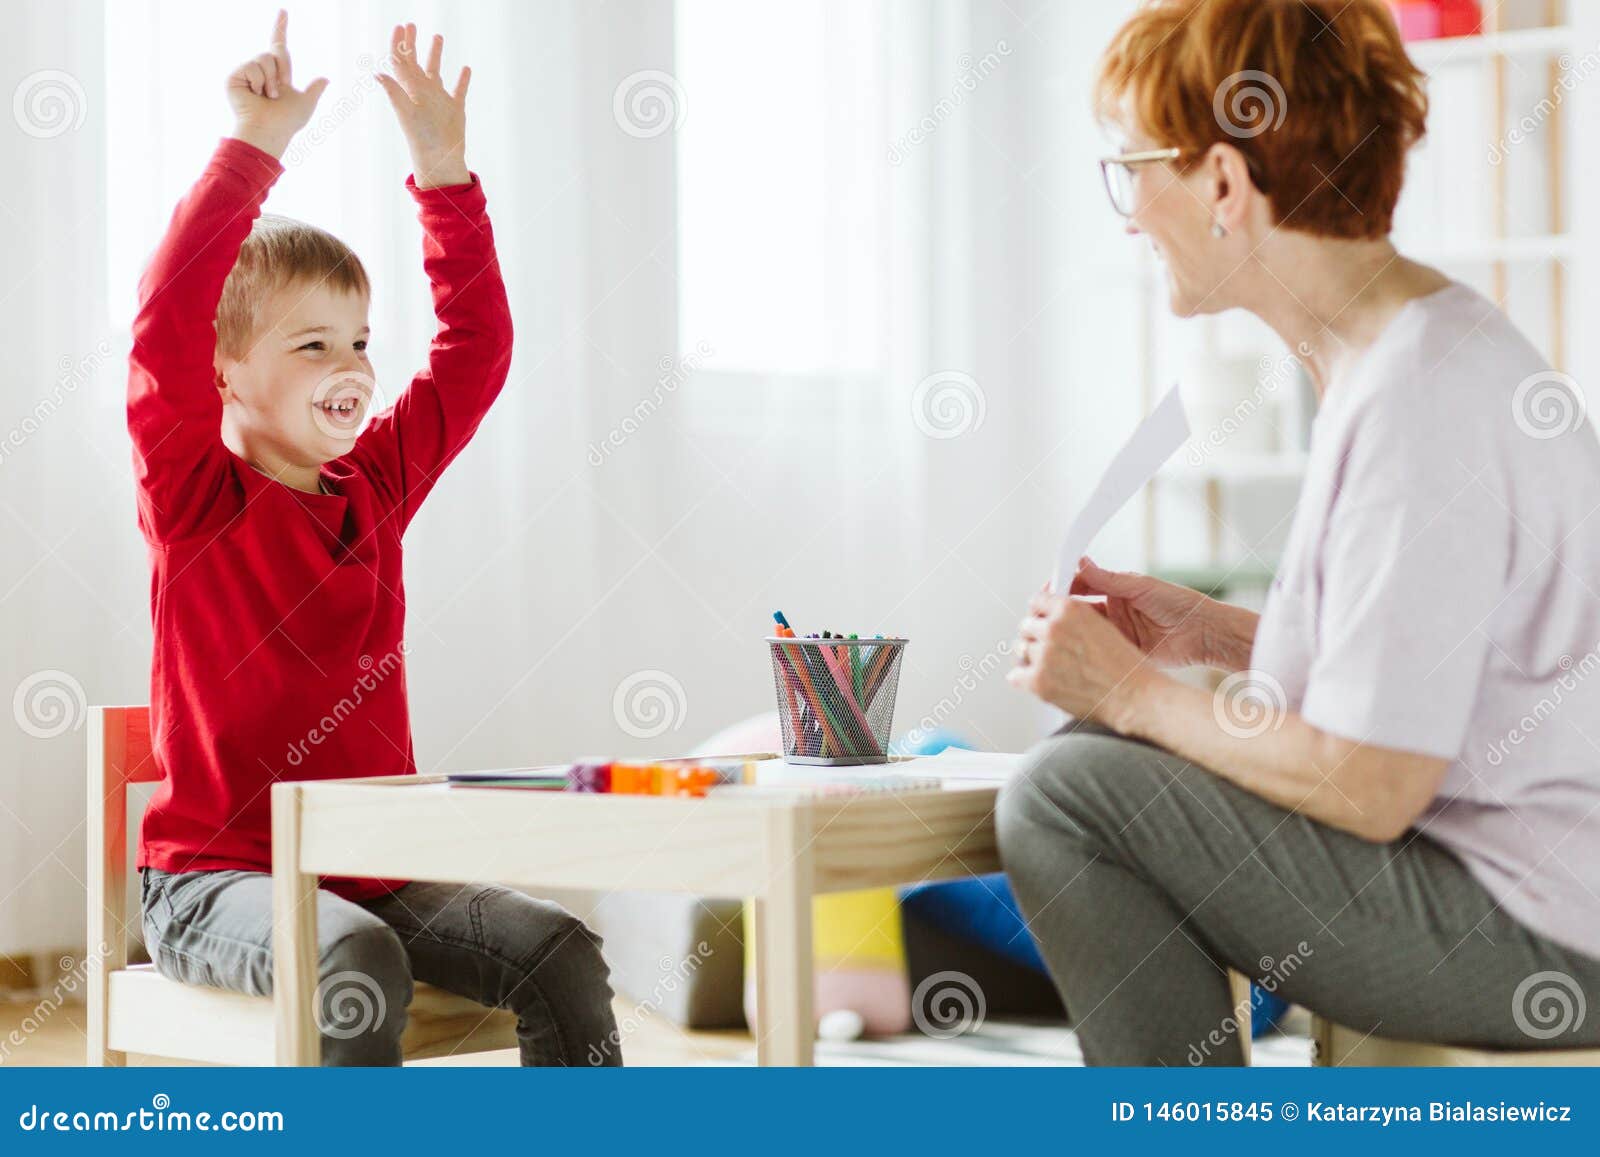 cute boy with adhd during session with professional therapist